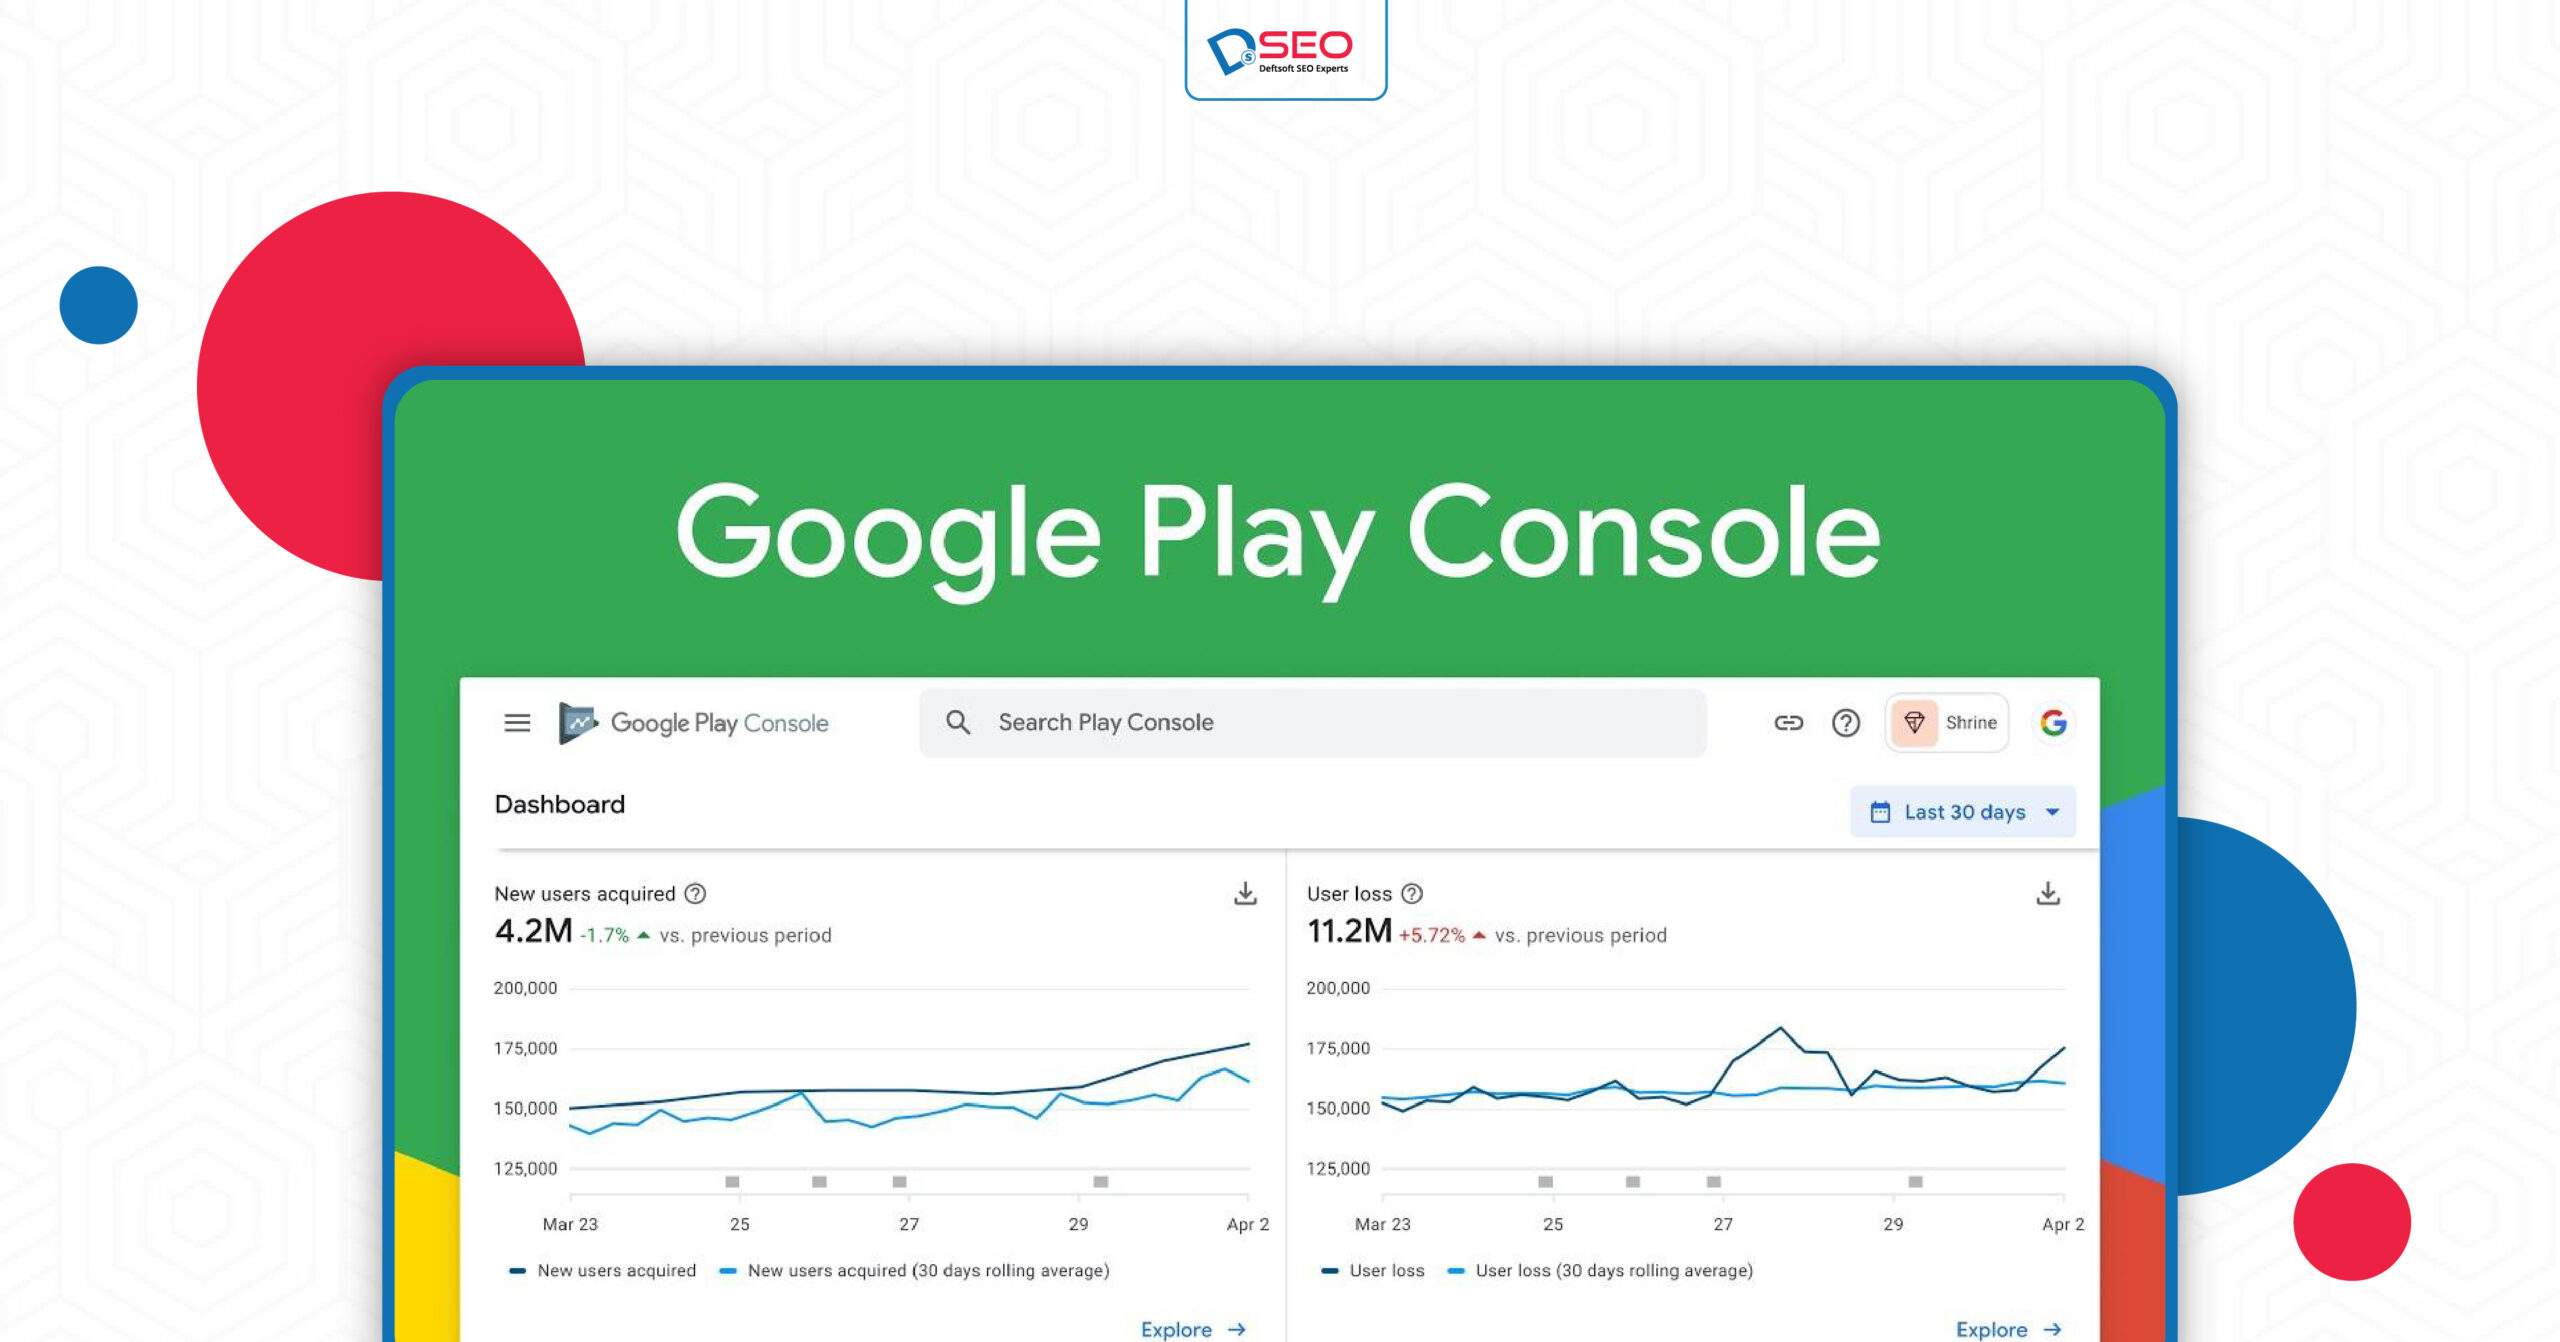 Google Play Console in ASO